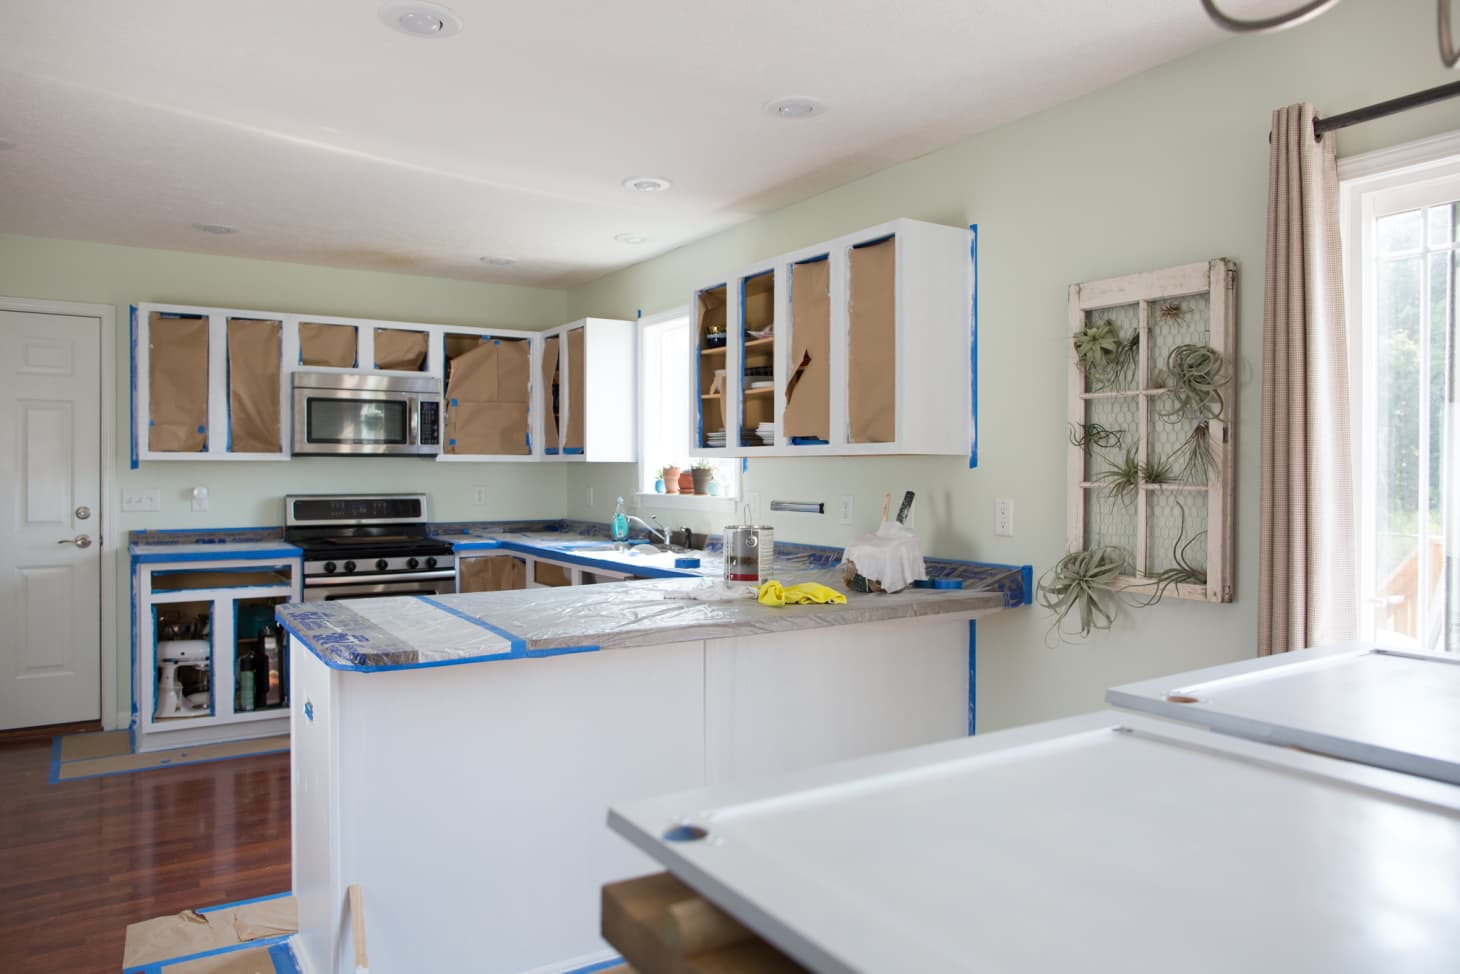 How Much Will It Cost to Paint Kitchen Cabinets | Kitchn